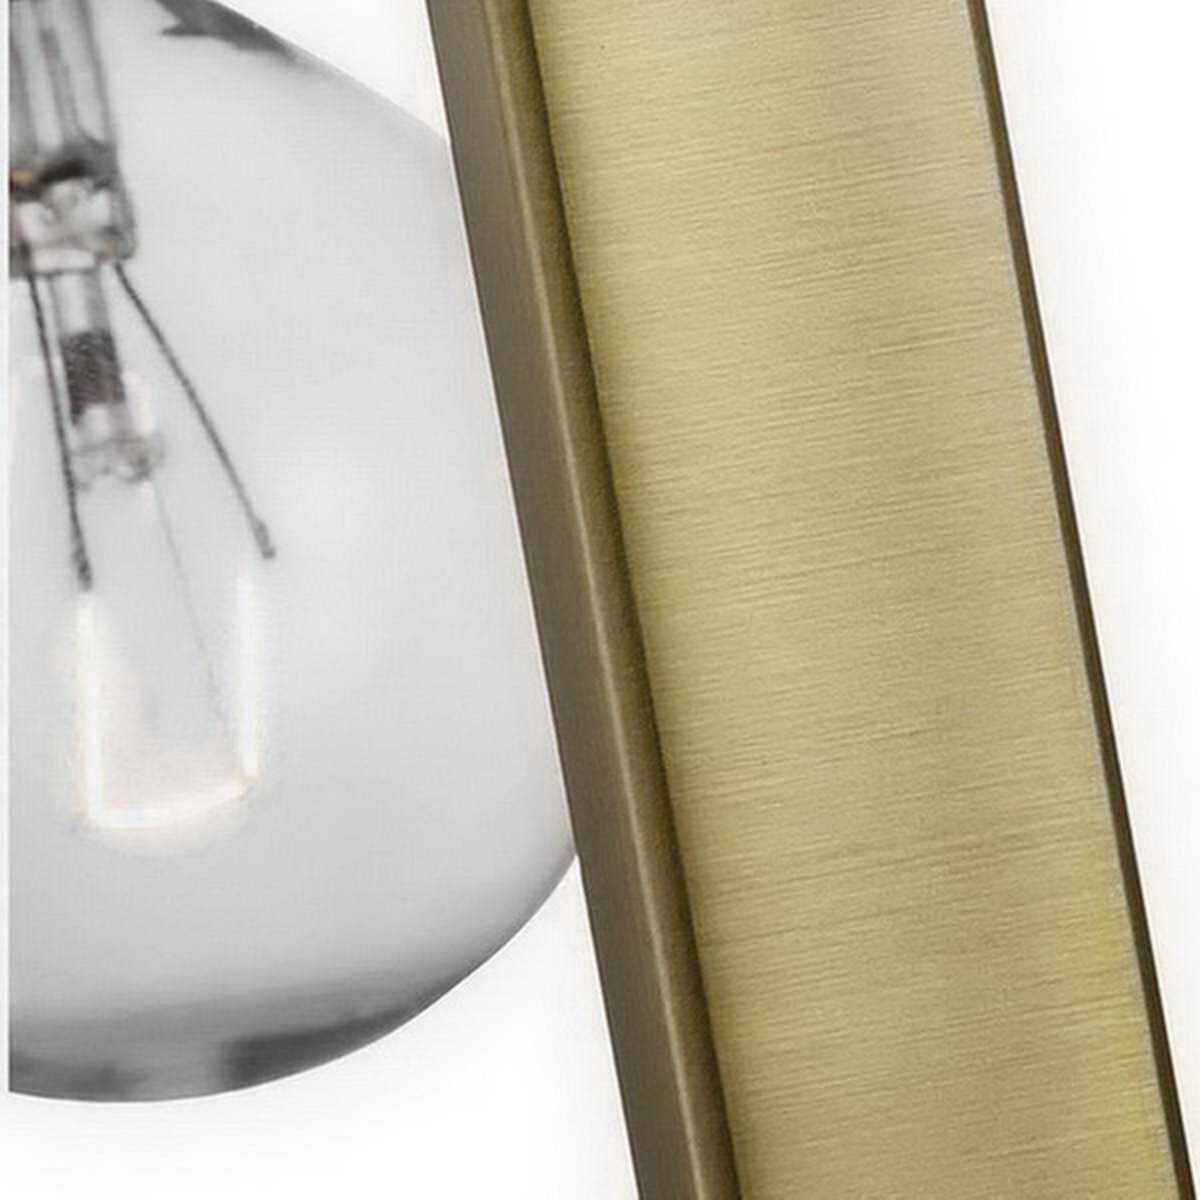 Atwell 8 in. Pendant Light